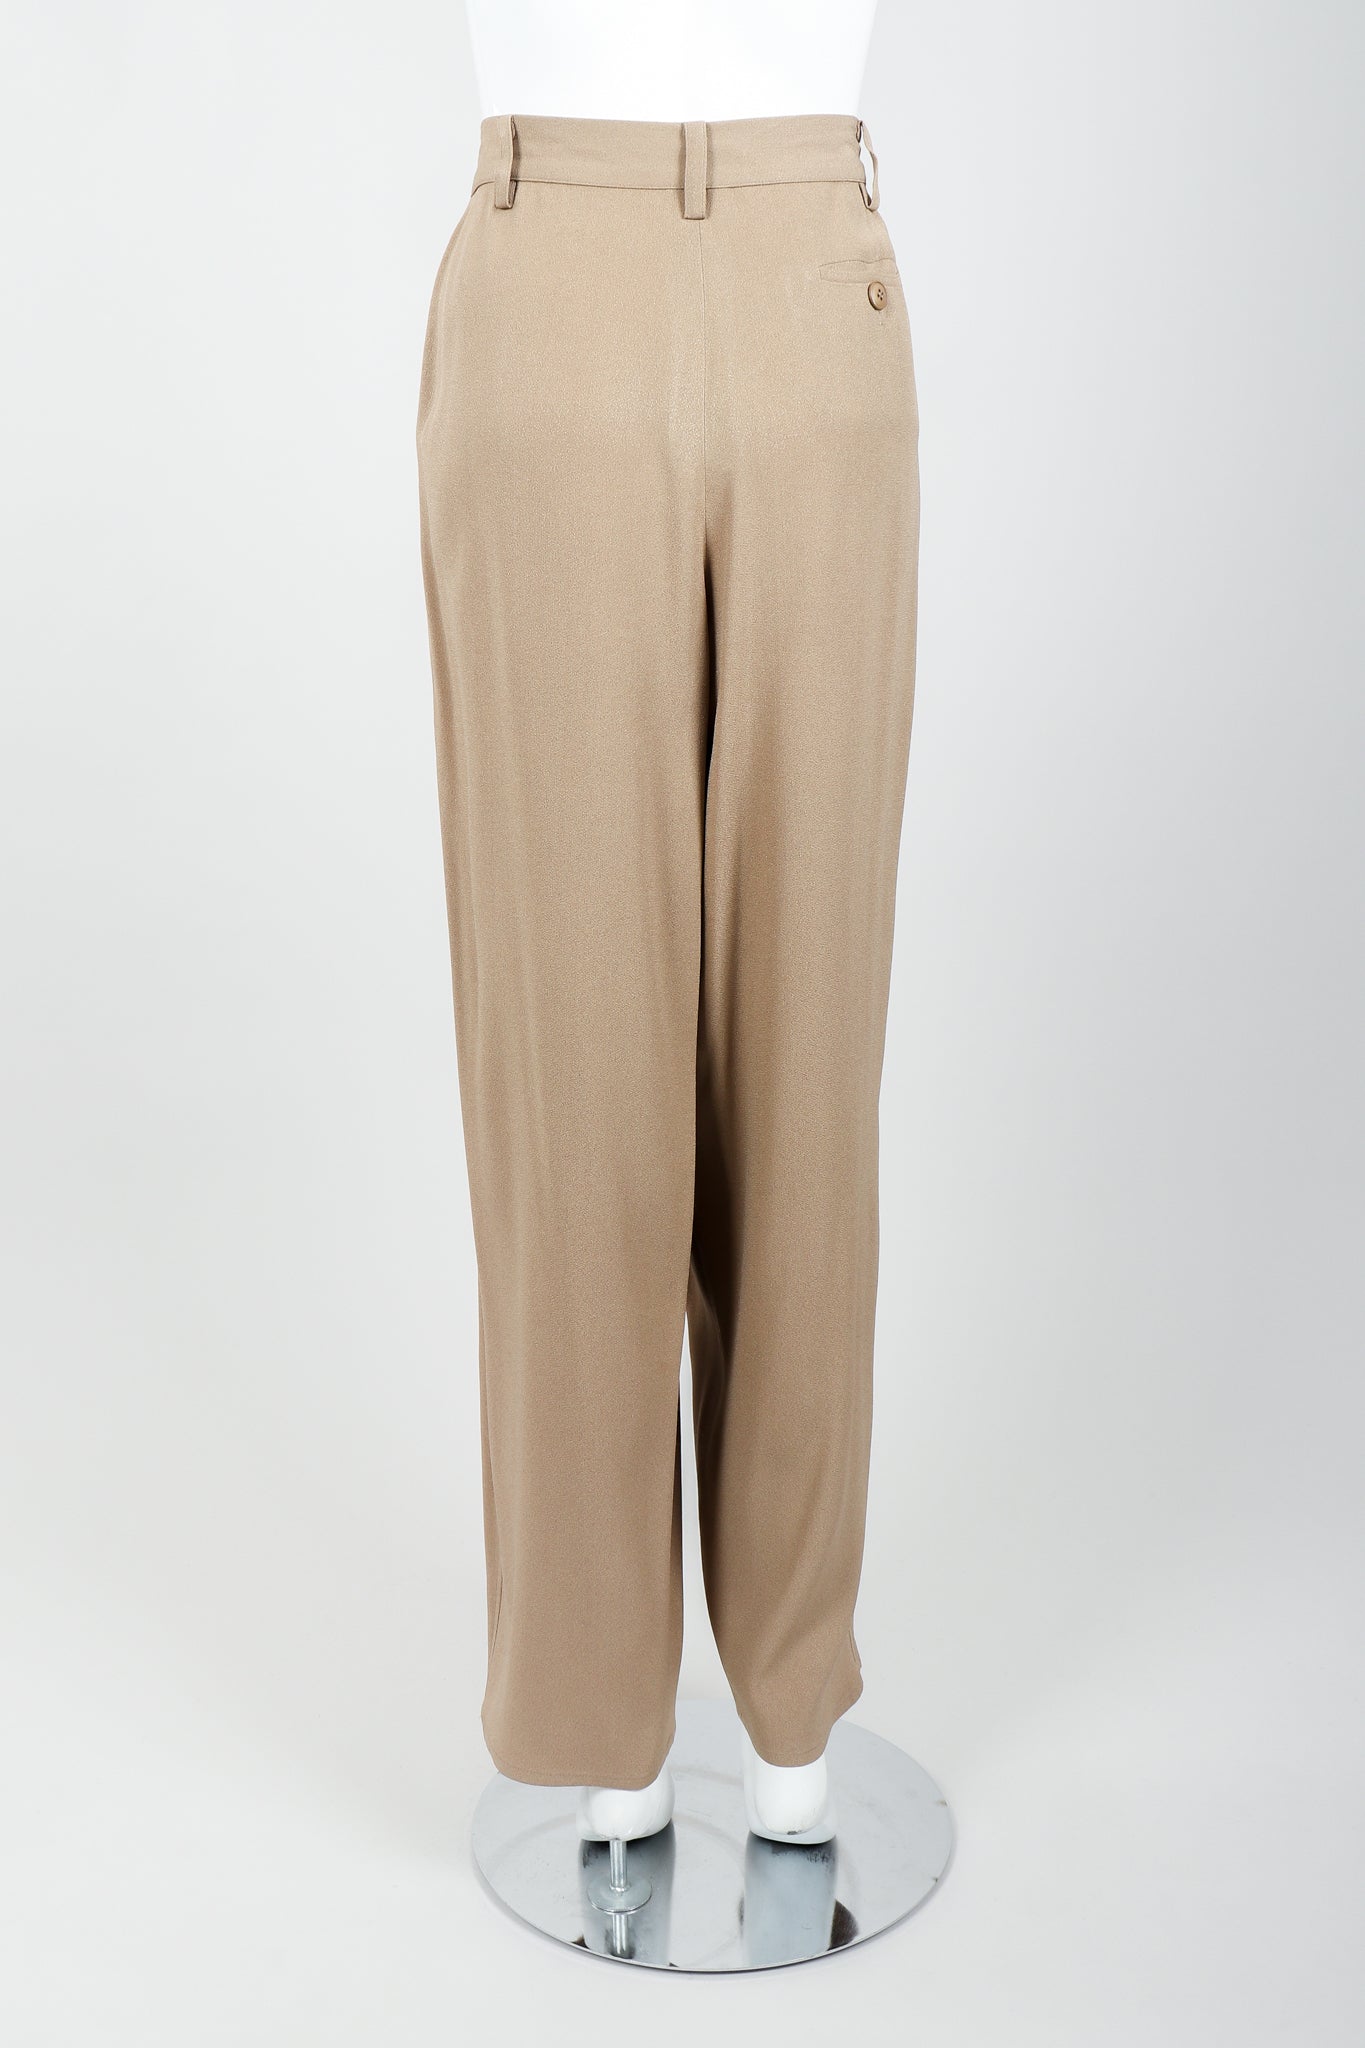 Vintage Sonia Rykiel Taupe Pleated Crepe Pant on Mannequin back at Recess